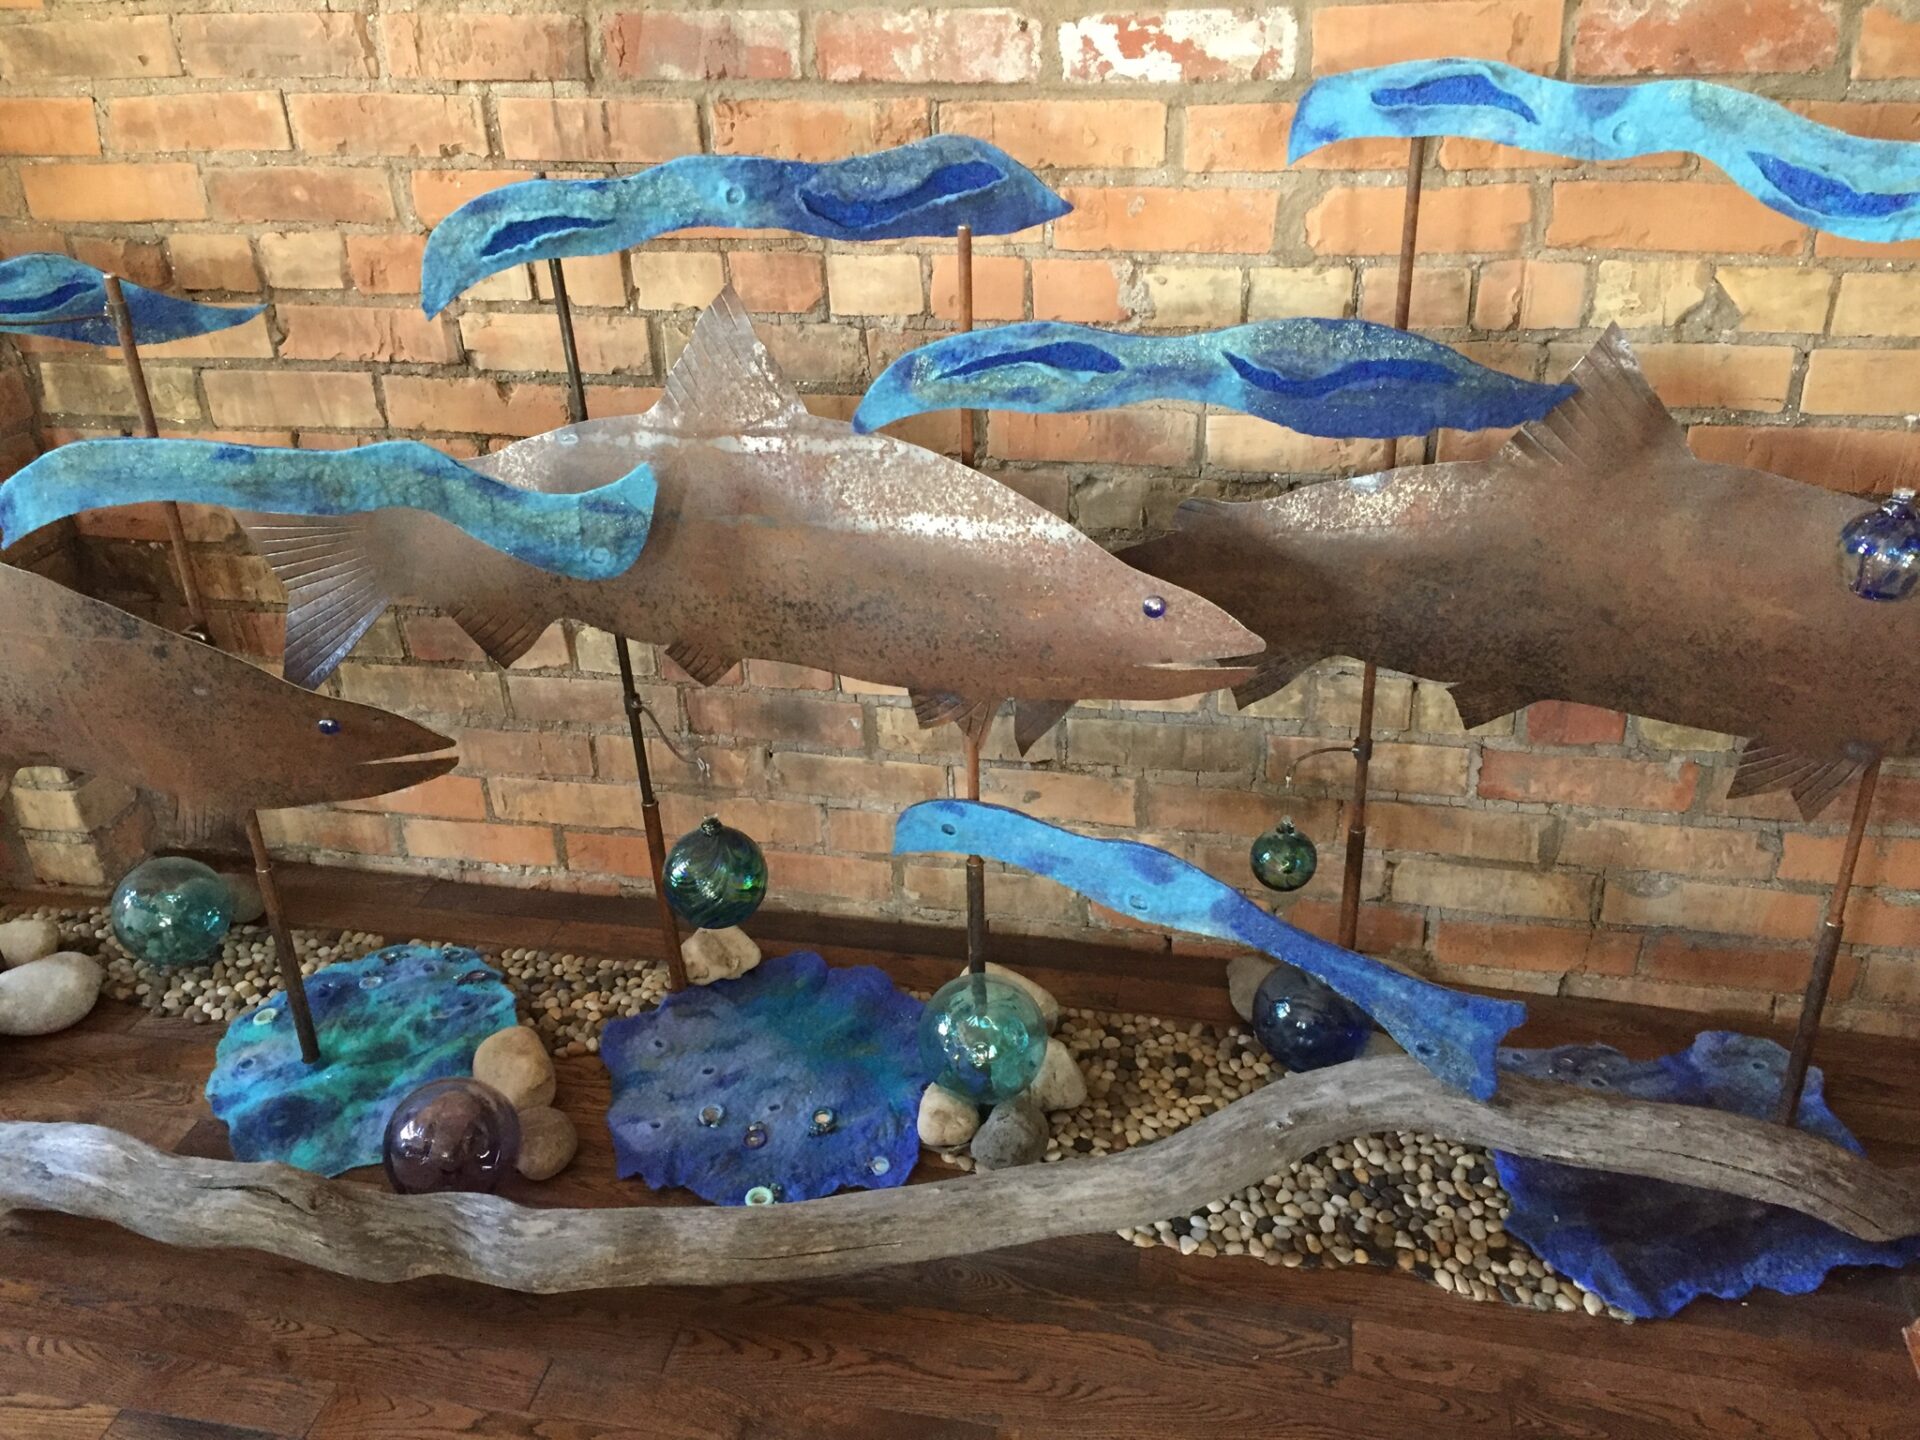 A group of metal dolphins with blue umbrellas.